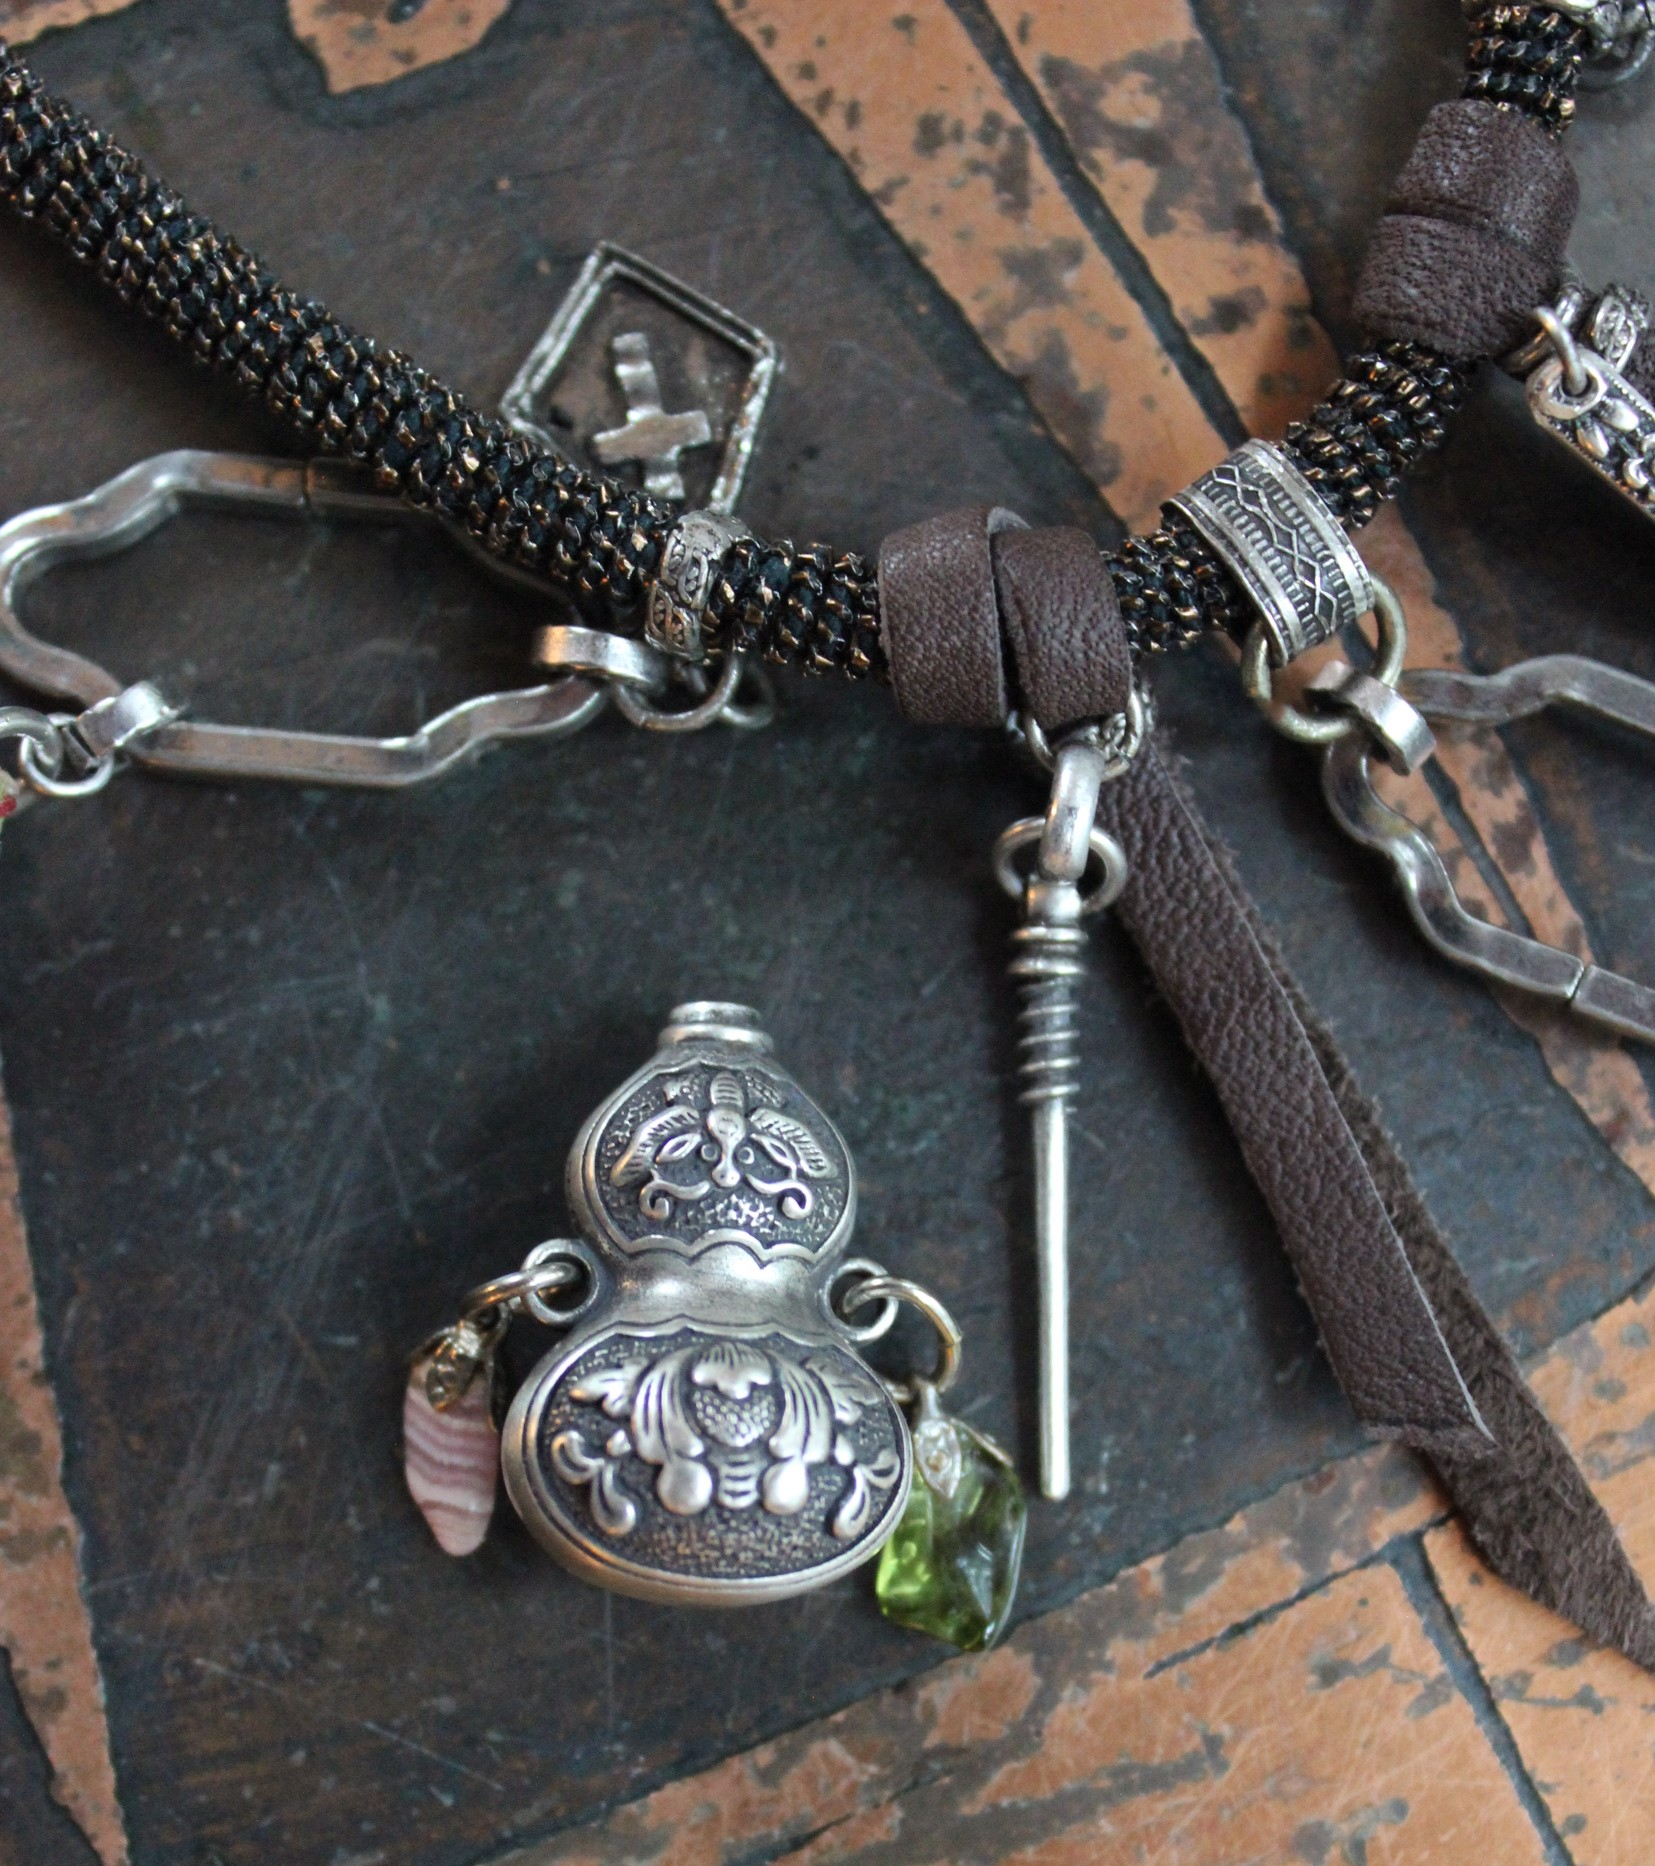 The Awakening Necklace with Antique Kuchi Gypsy Tassels,Sterling Engraved The Judgment Tarot Medal,Sterling Oil Vessel,Antique Sterling Talon & More!